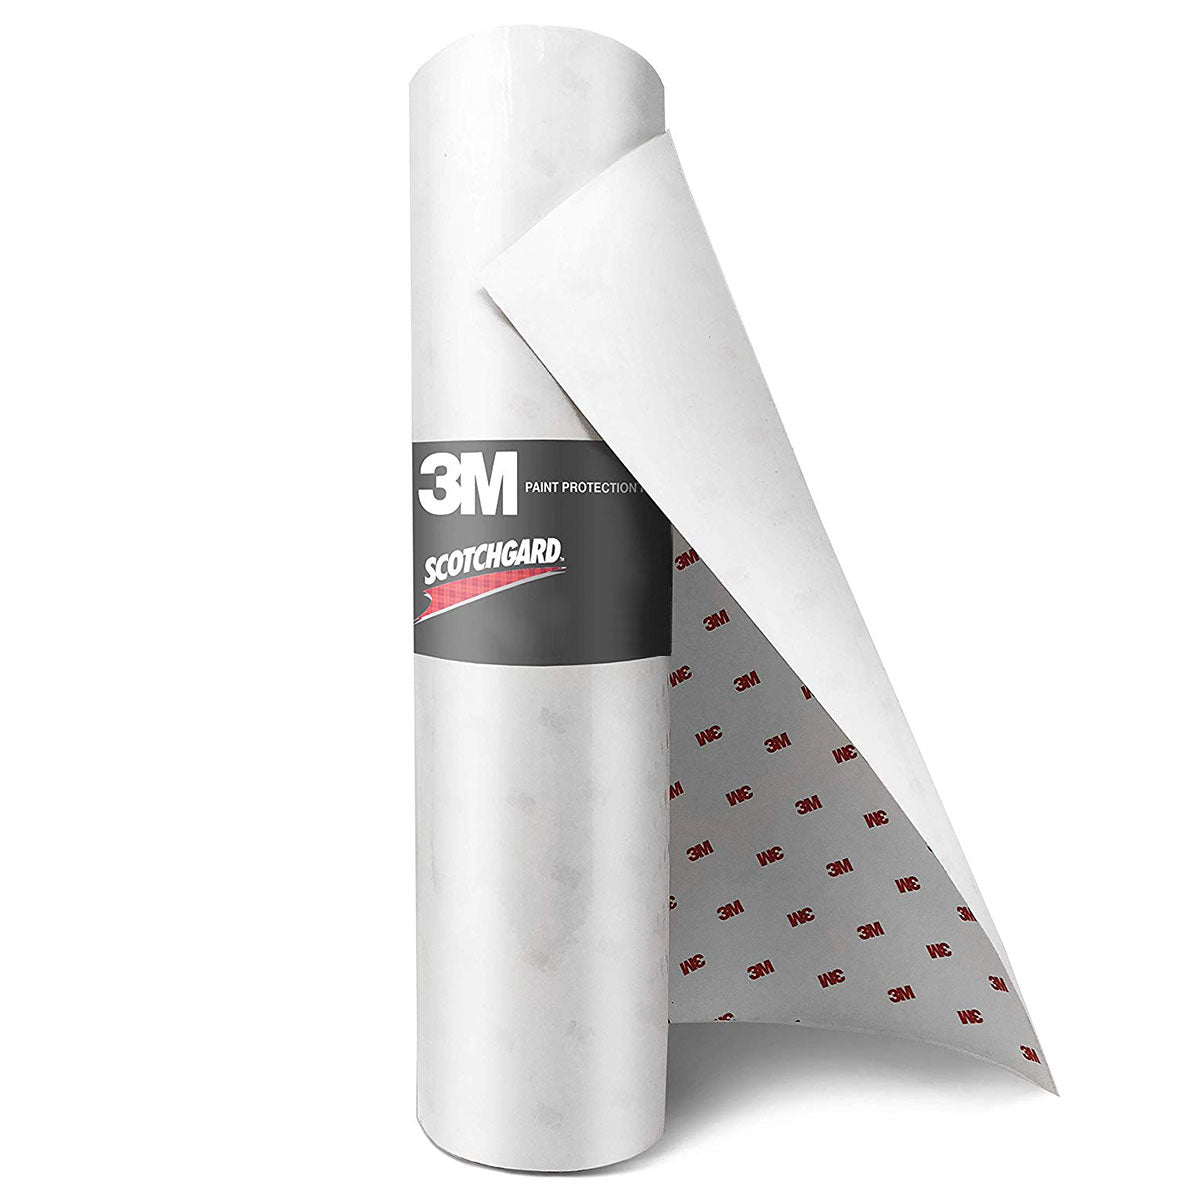 Paintgard 3M Paint Protection Film Roll 100mm x 5 meters